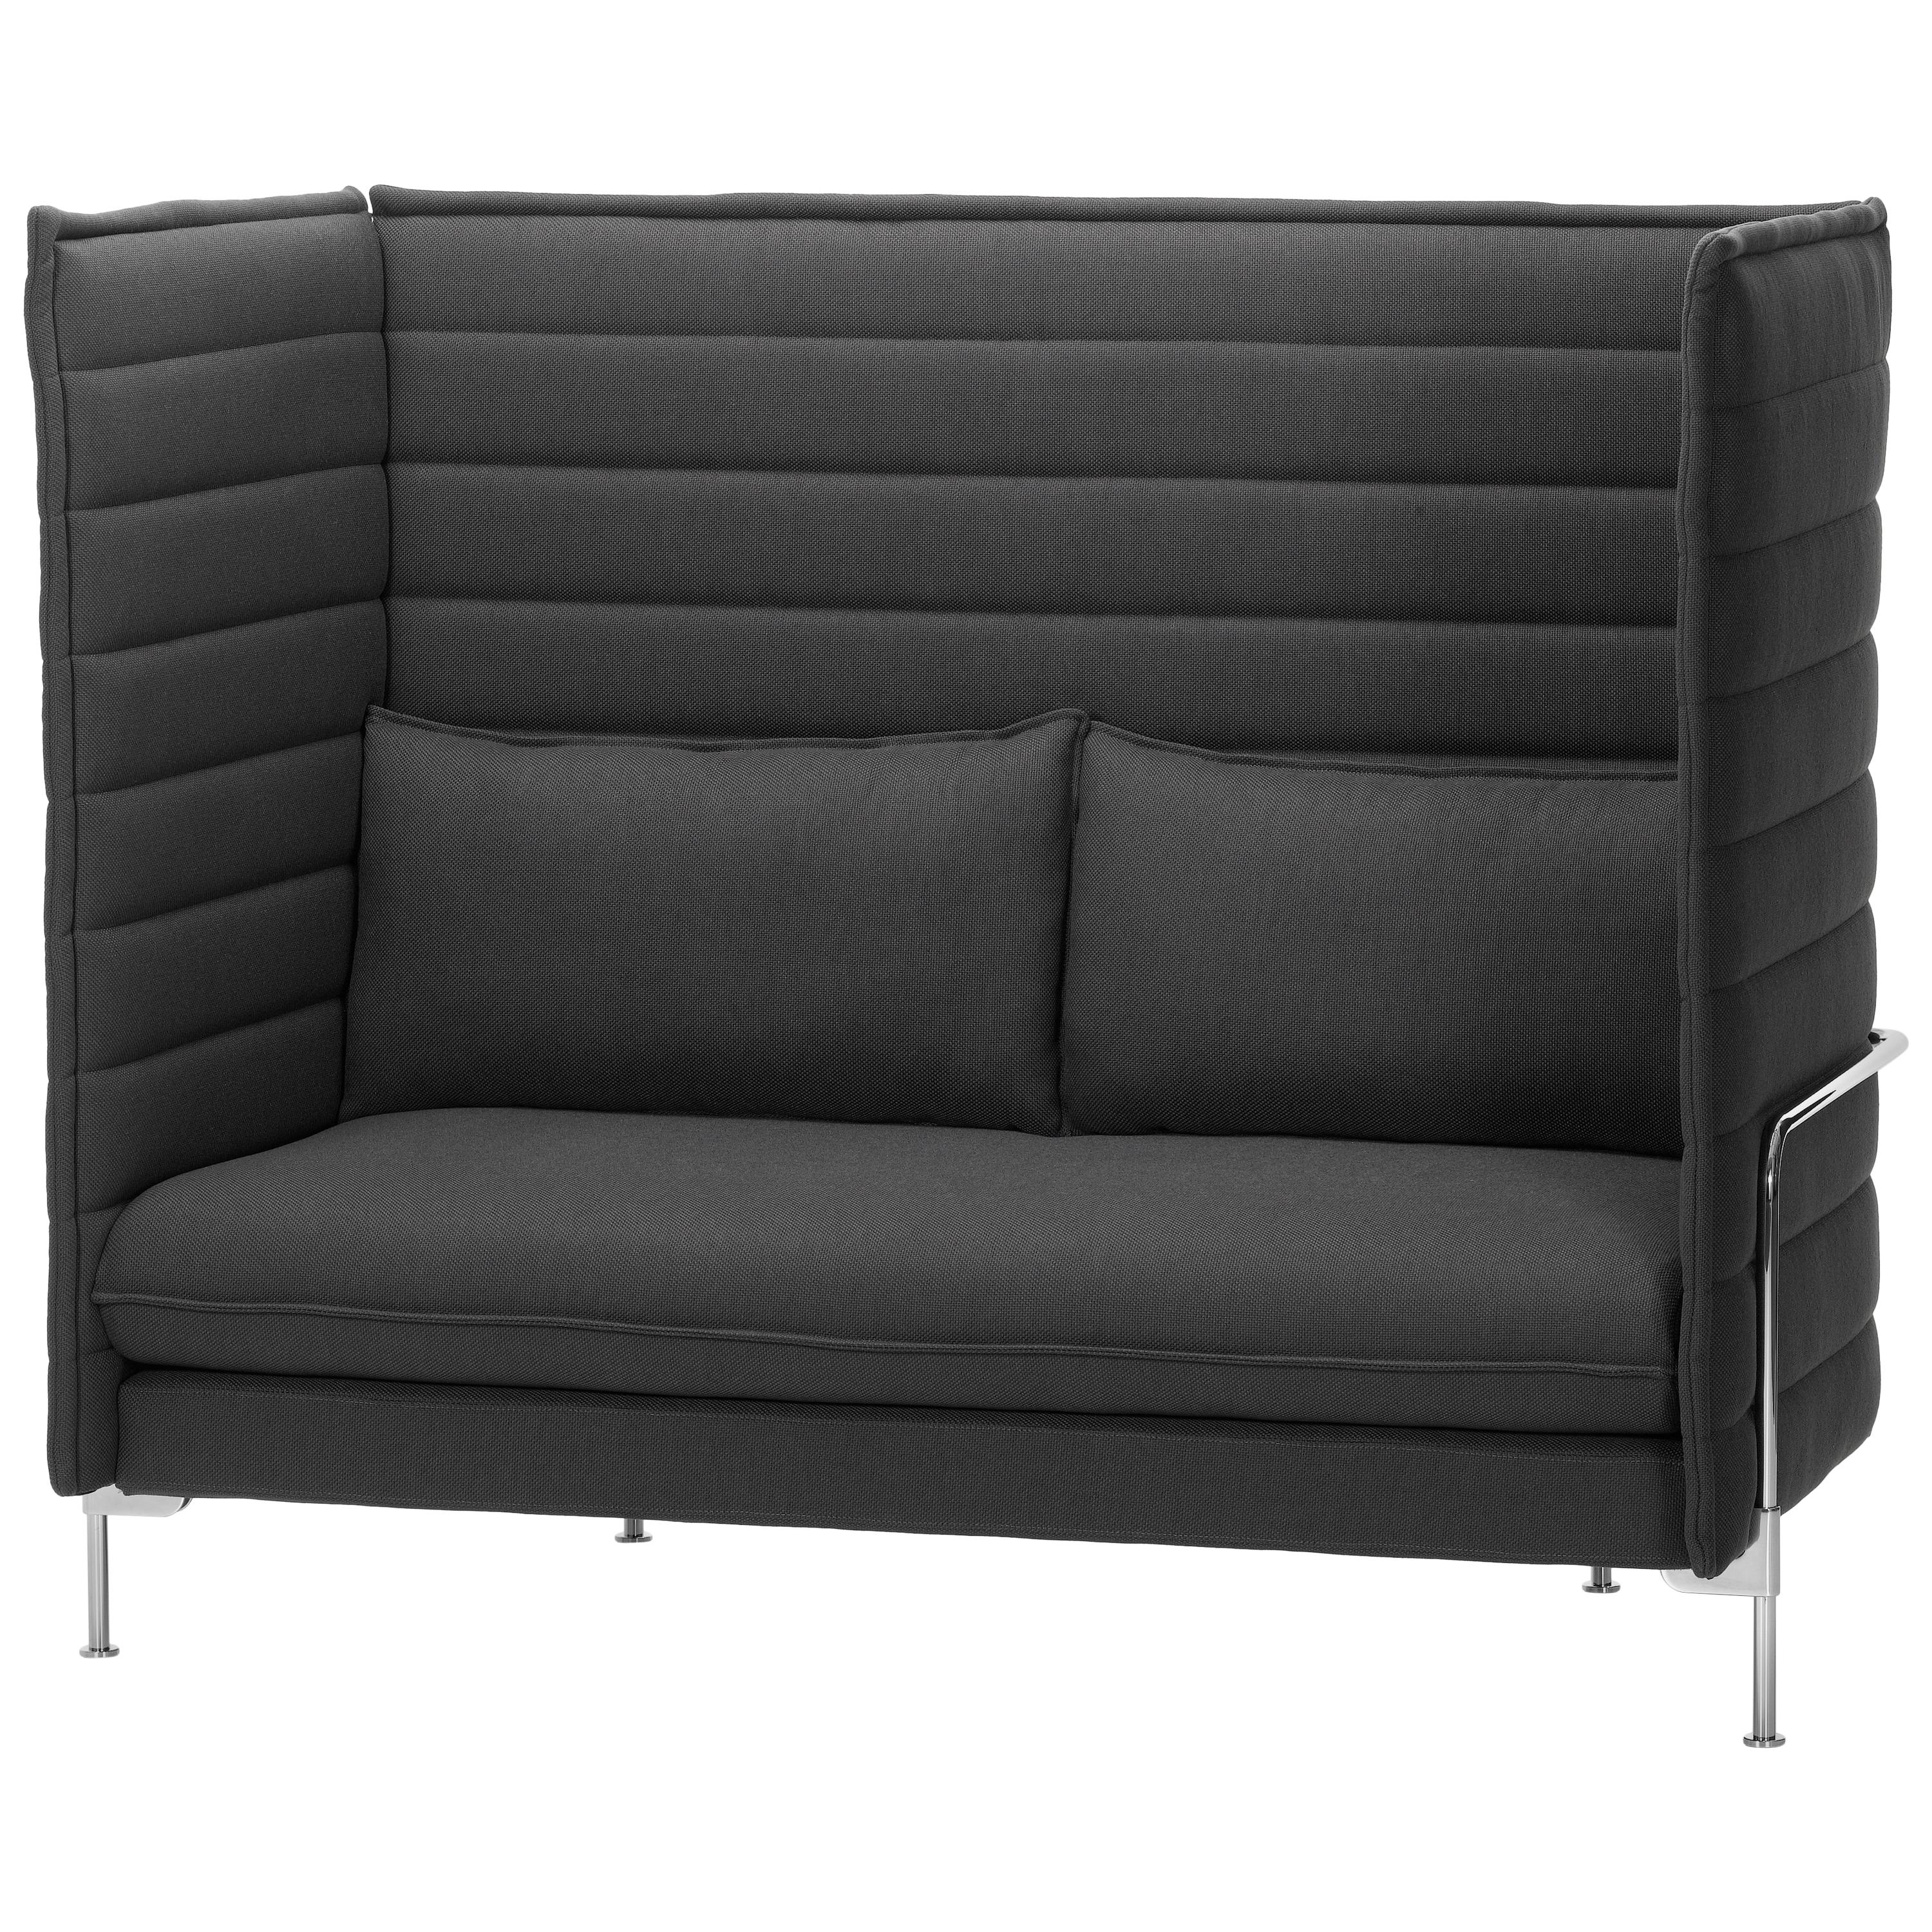 Vitra Alcove High Back 2-Seat Sofa in Dark Gray Volo by Ronan & Erwan Bouroullec For Sale